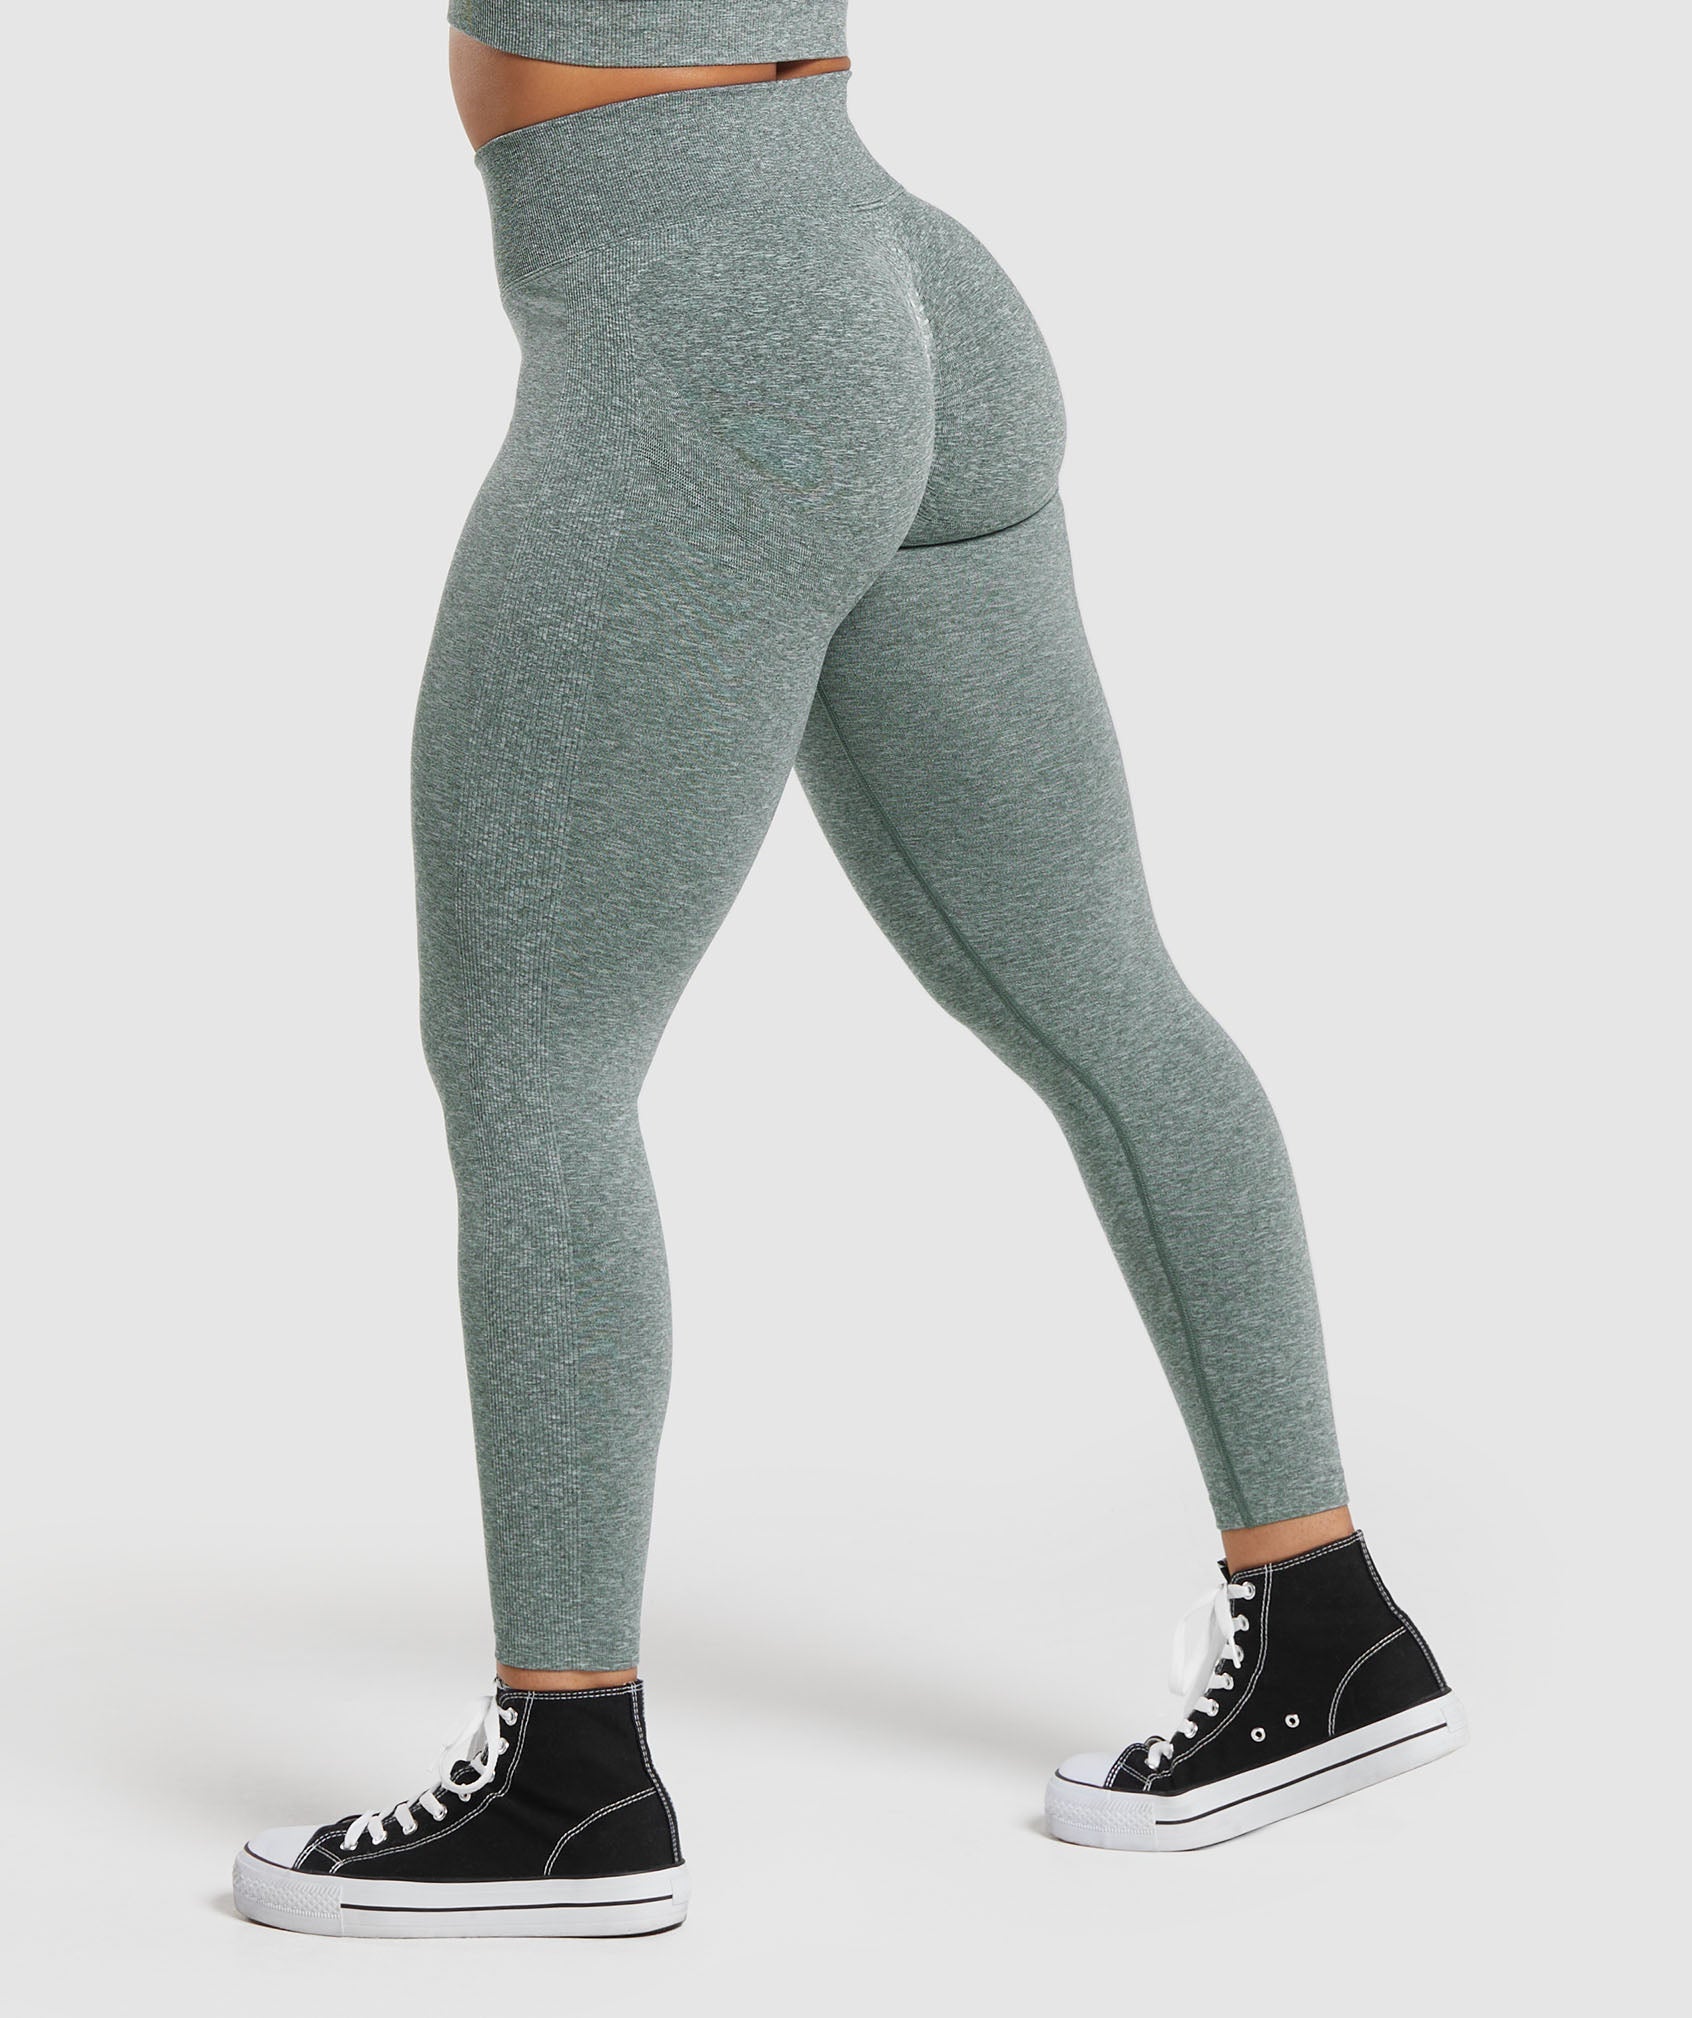 Lift Contour Seamless Leggings in Slate Teal/White Marl - view 4